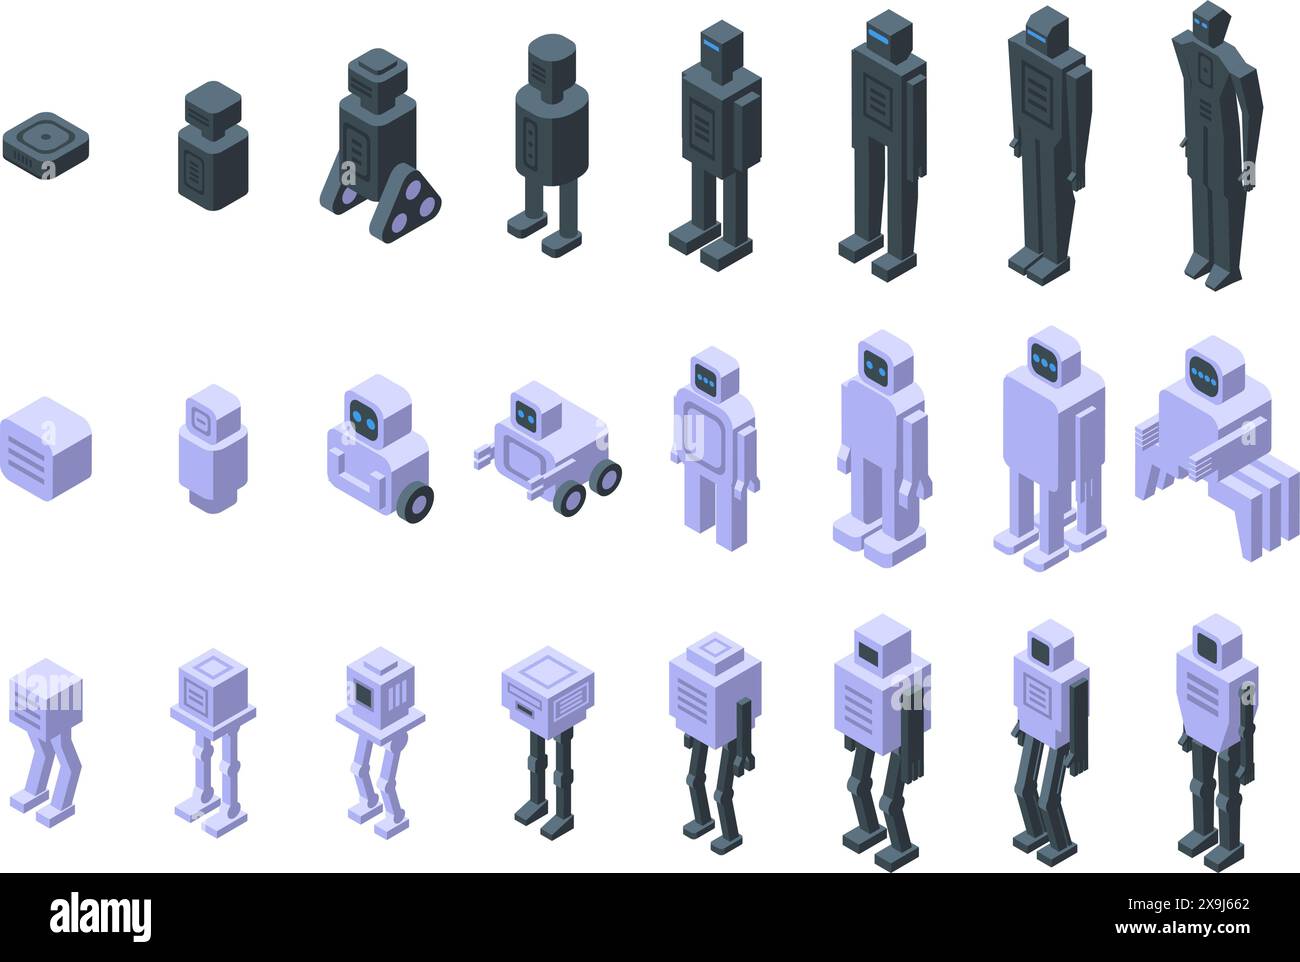 Robot evolution icons isometric set vector. A series of robot figures in various stages of development. The first figure is a small robot with a box on its head, and the last figure is a large robot with a box on its head Stock Vector